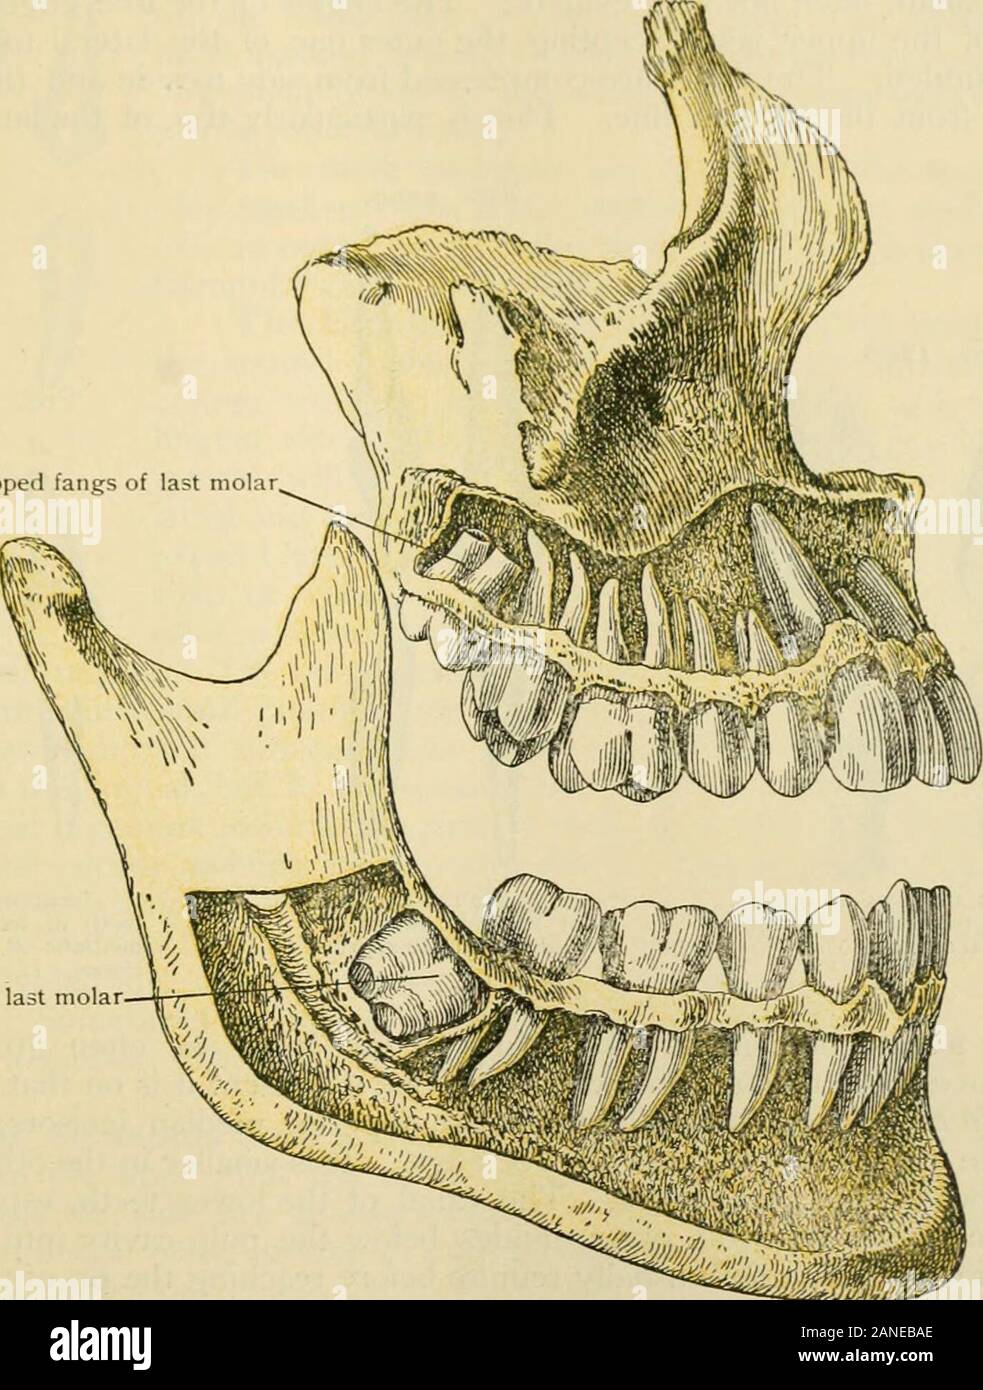 Human anatomy, including structure and development and practical considerations . ids and molars. Thesides against the other teeth are often called the median and distal, supposing theteeth to be implanted in a straight transverse line. This is not satisfactory in all See Homologies, page 1566. THK TKETII. 1543 cases. We shall speak instead of the inner antl outer sides of the incisors andcanines and of the anterior and posterior sides of the bicusi)ids and mcjlars. It theposition of liu- tooth in the jaw be remembered, no confusion is possible. The Incisors.—The croums are characterized by sl Stock Photo